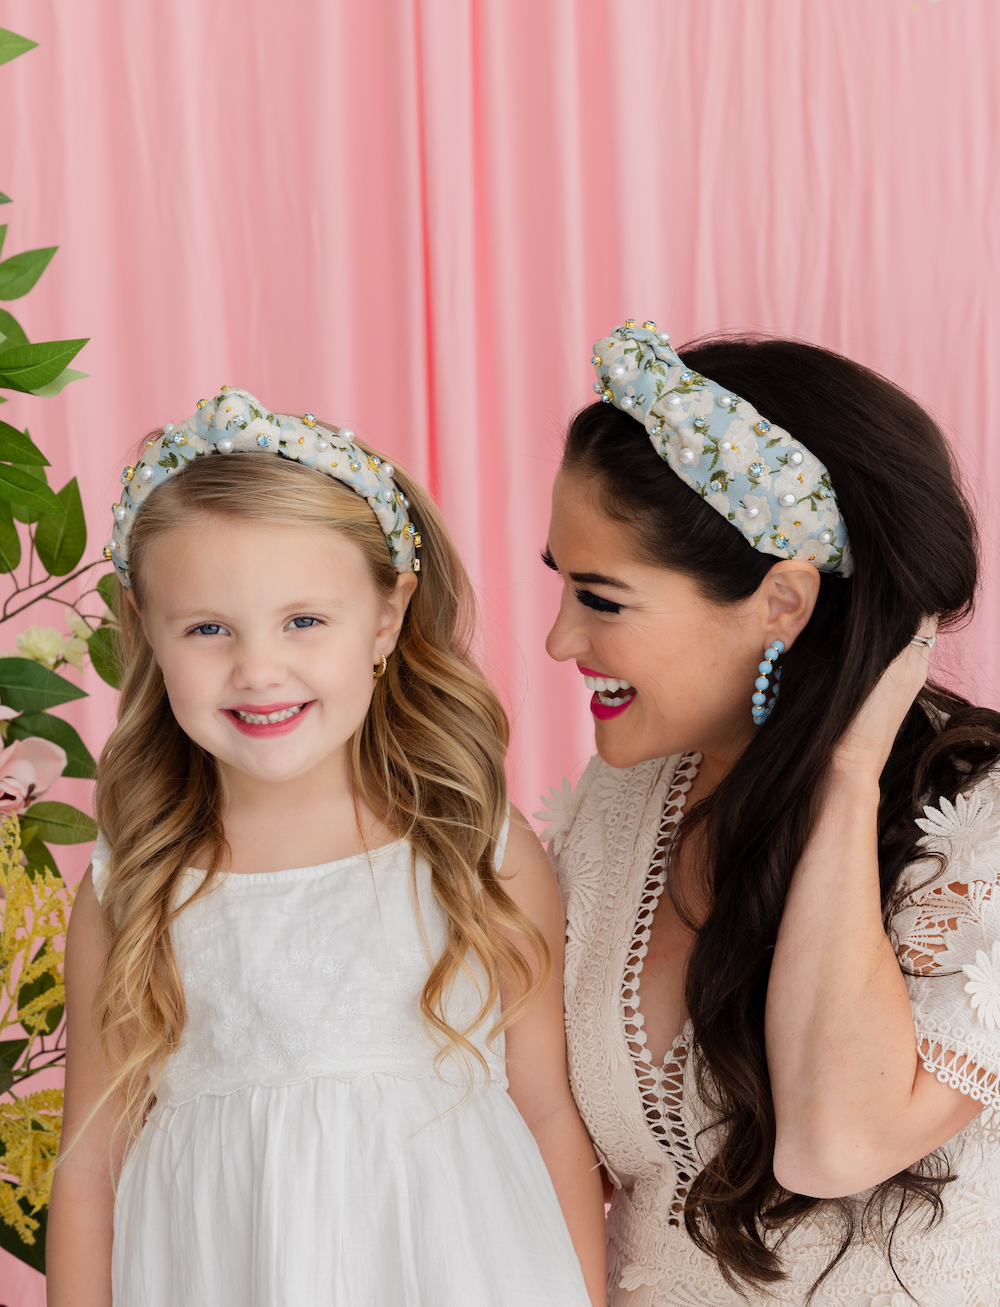 Adult Size Light Blue & White Floral Headband with Crystals & Pearls